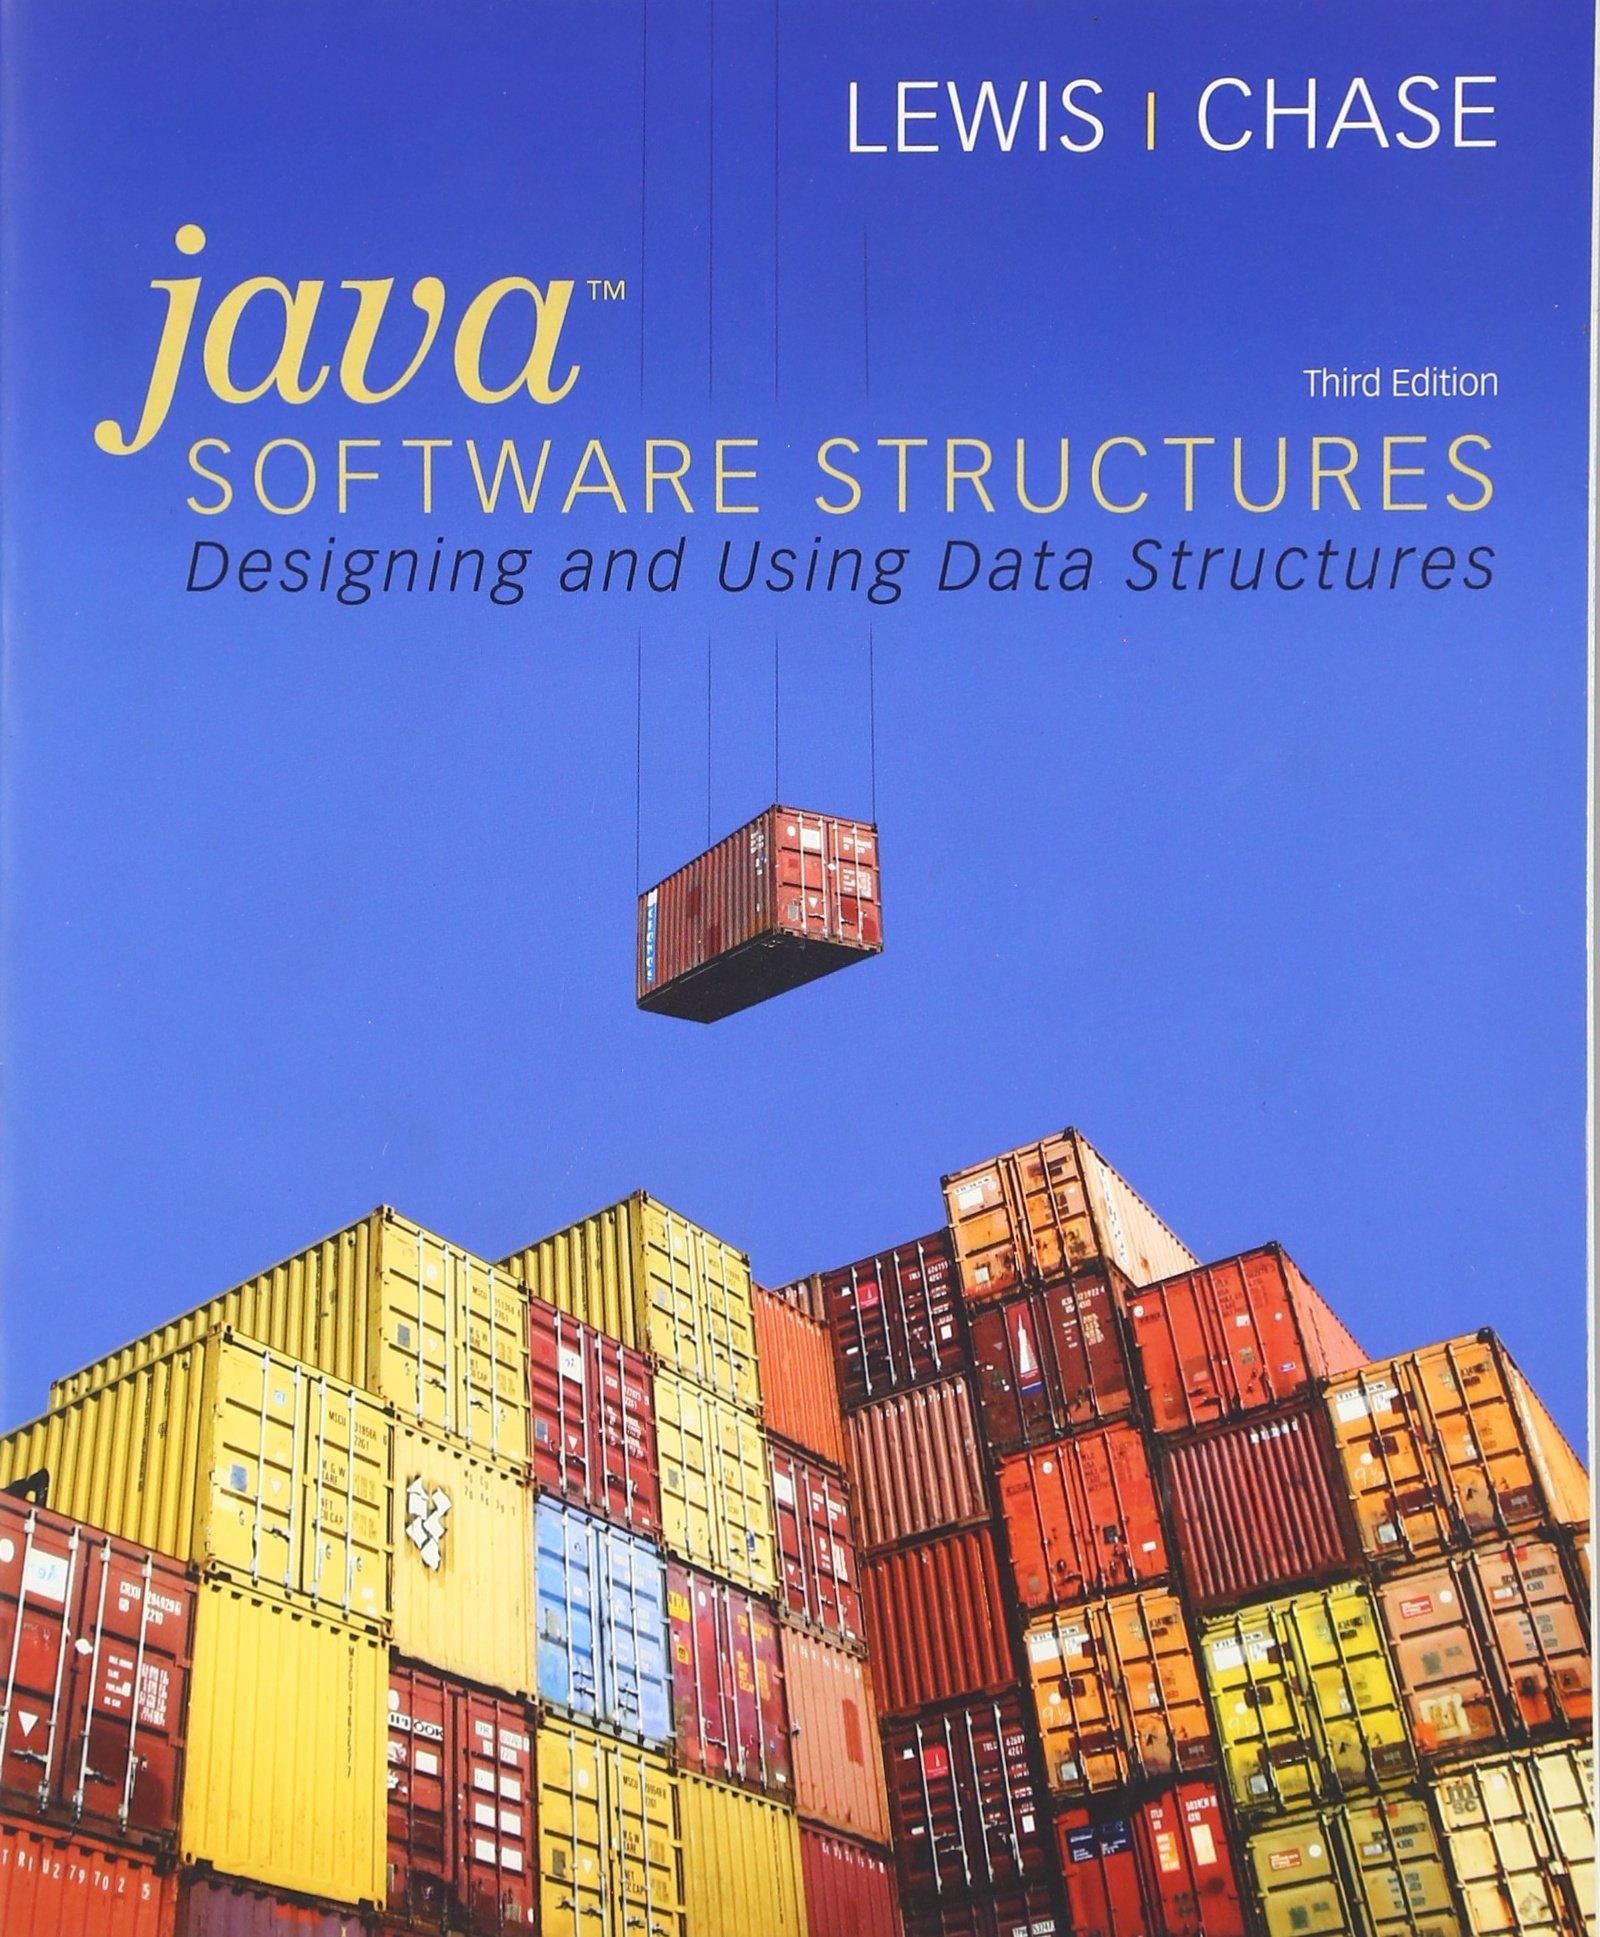 java software structures designing and using data structures 3rd edition john lewis, joseph chase 0136078583,